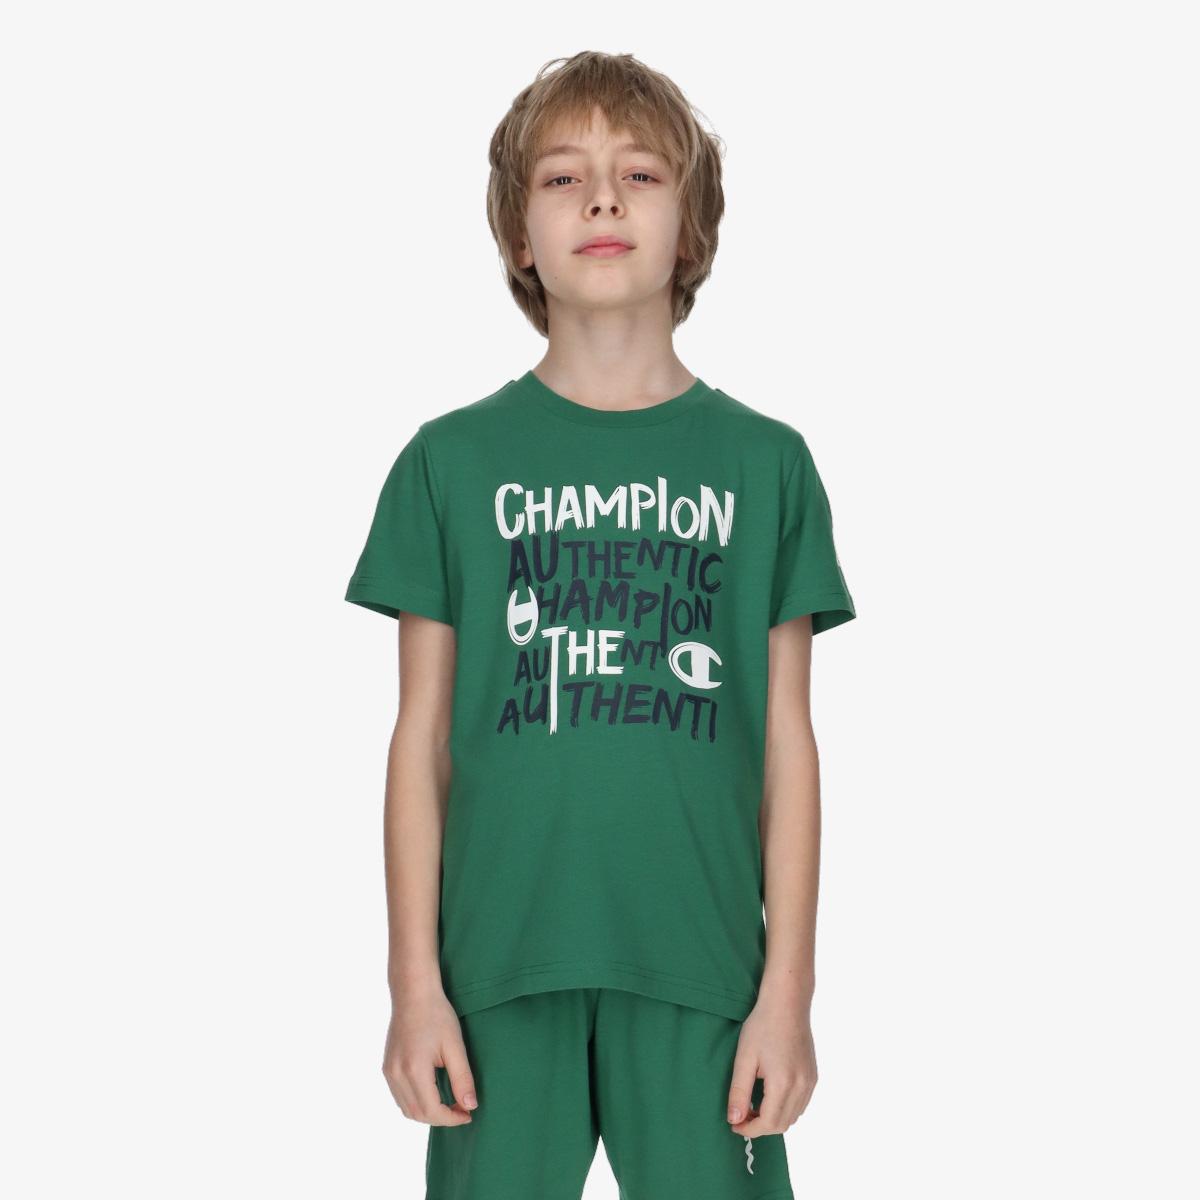 Champion AUTHENTIC ATHLETICWEAR T-SHIRT 